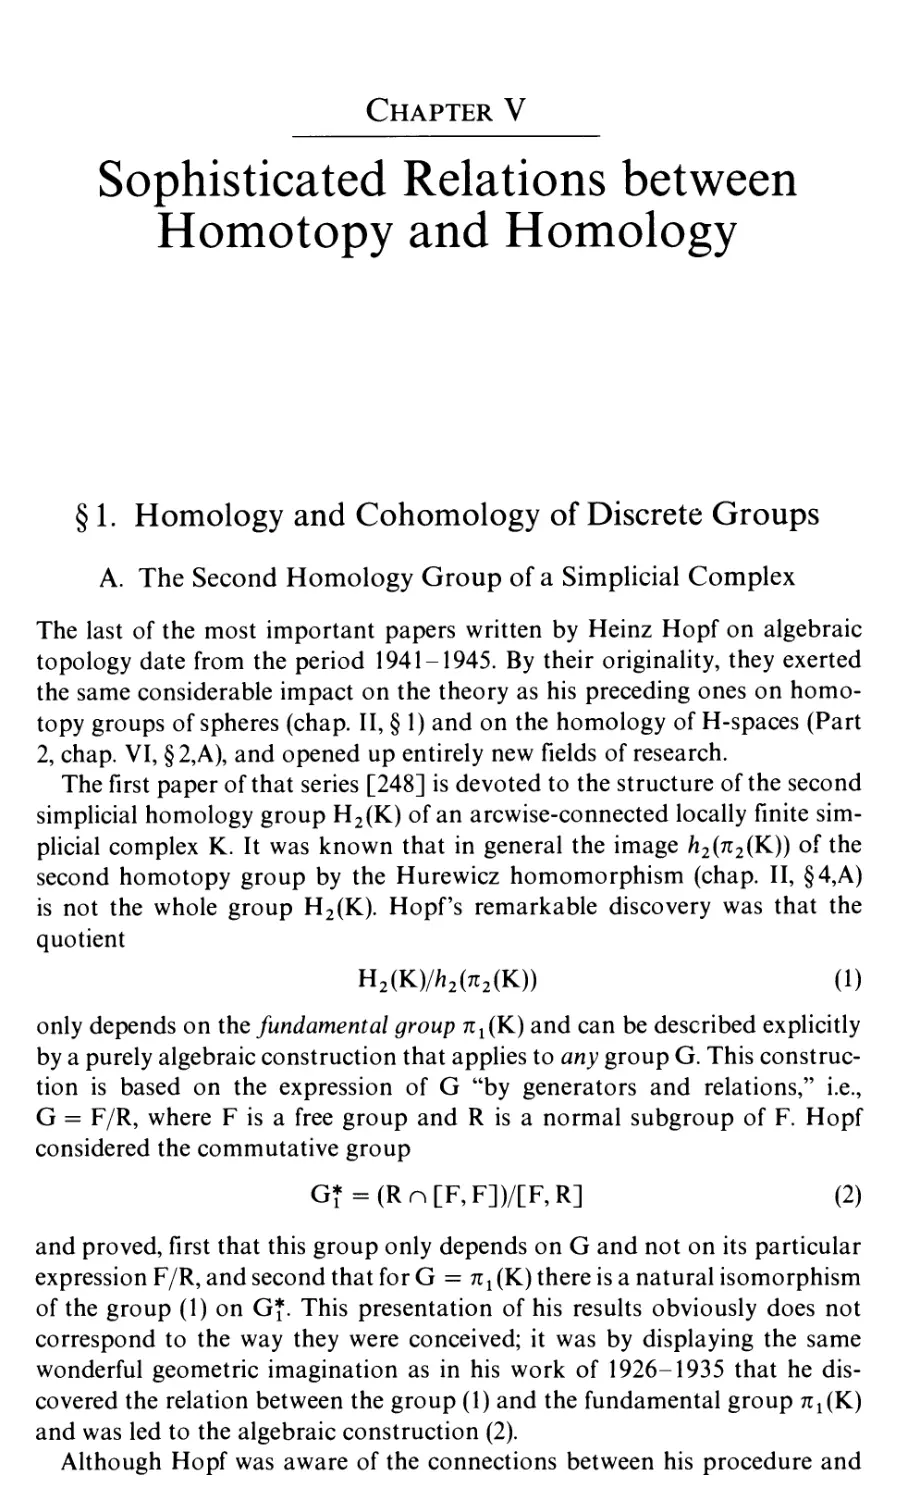 Chapter V. Sophisticated Relations between Homotopy and Homology